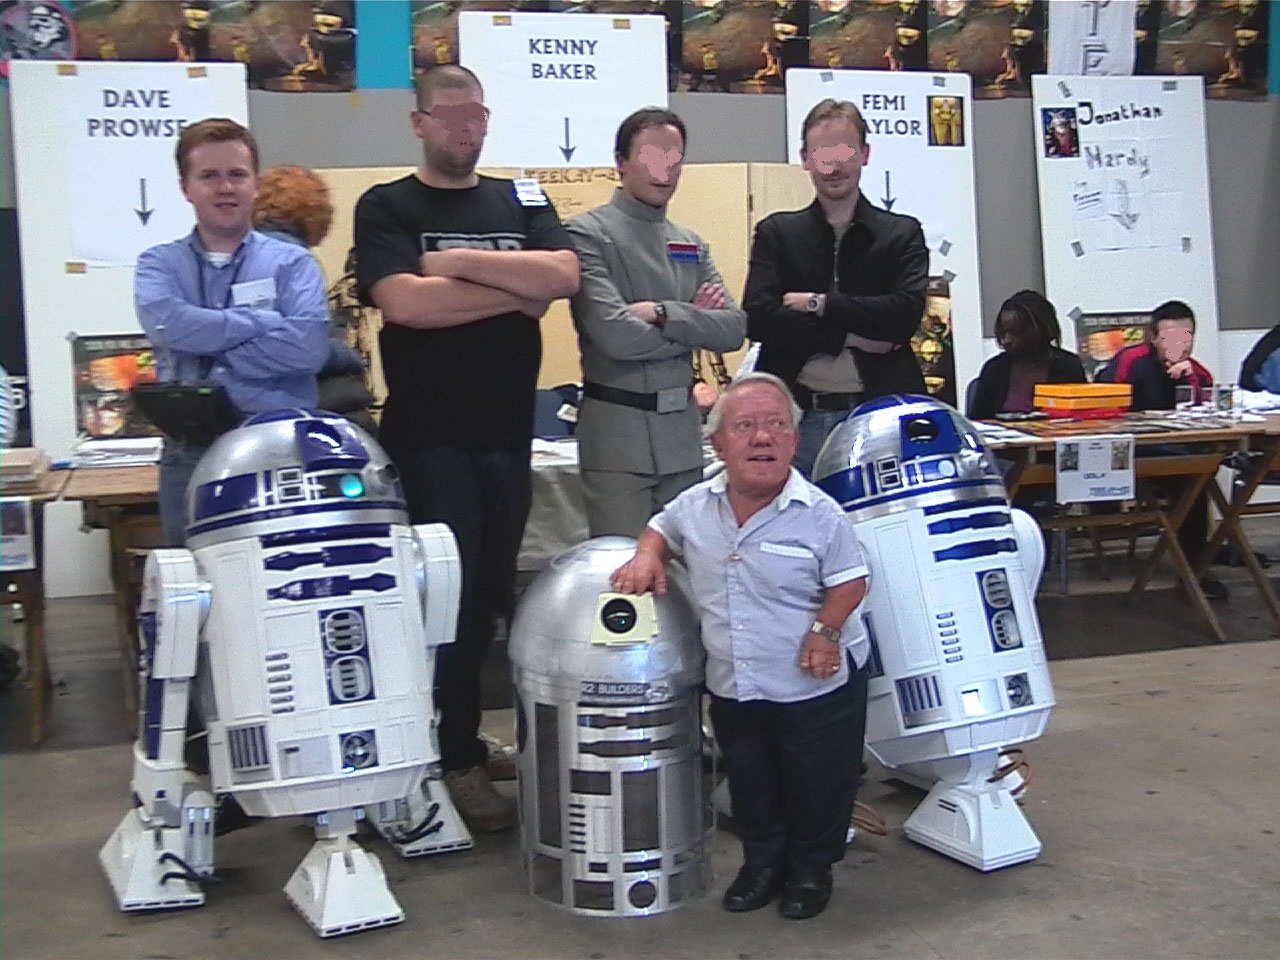 R2 builders with Kenny Baker